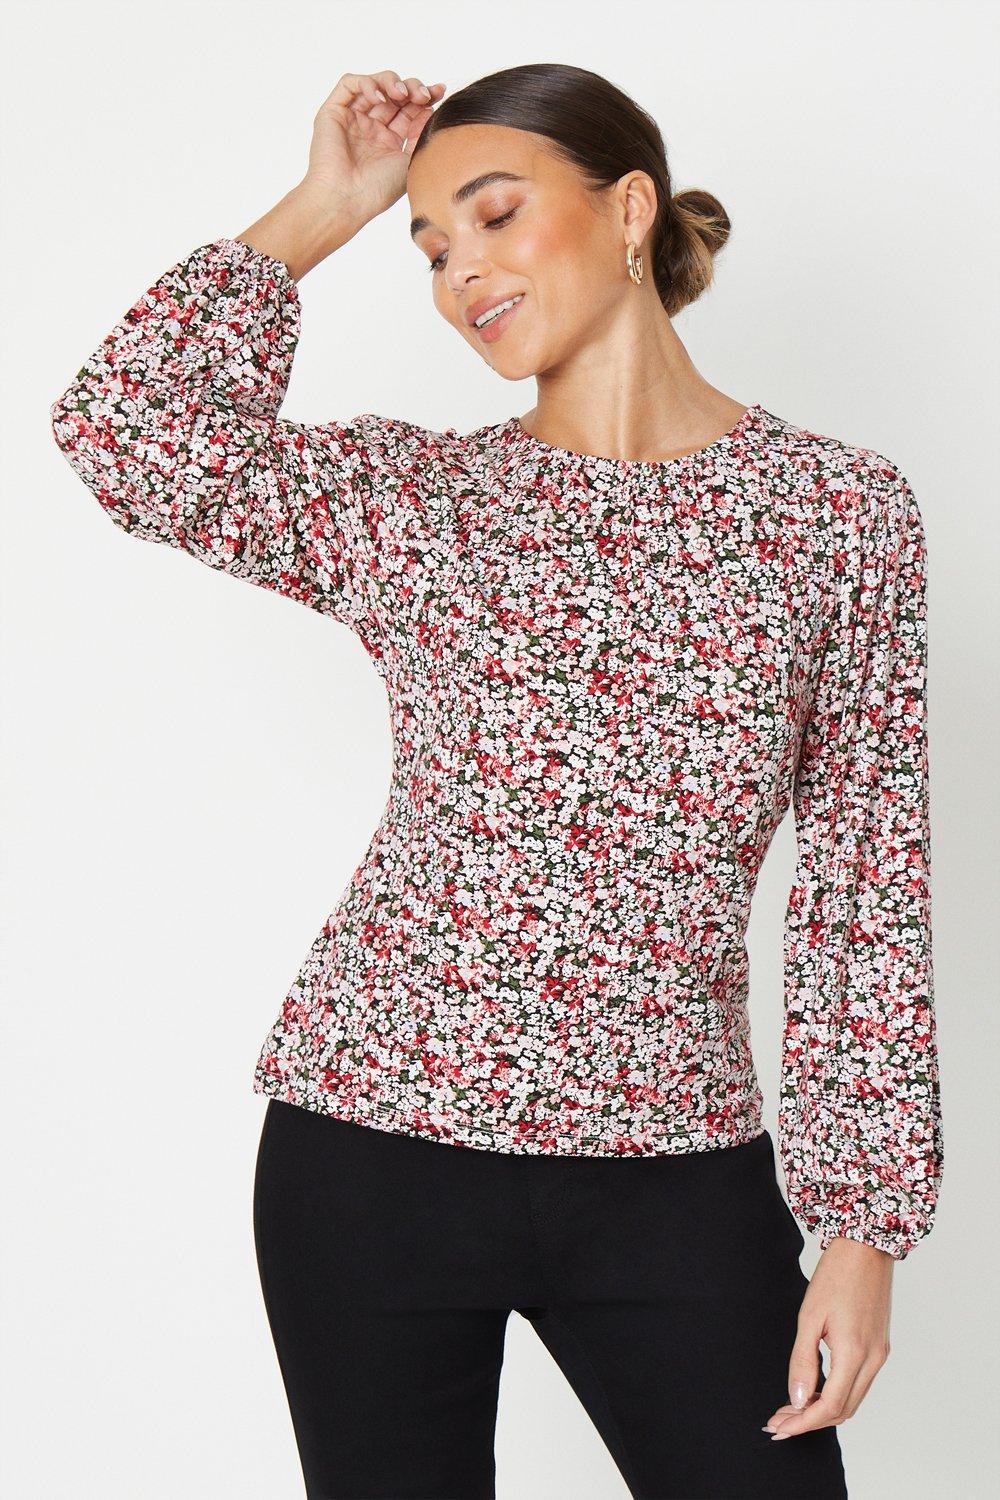 Women's Petite Gathered Neckline Long Sleeve Top - floral - S